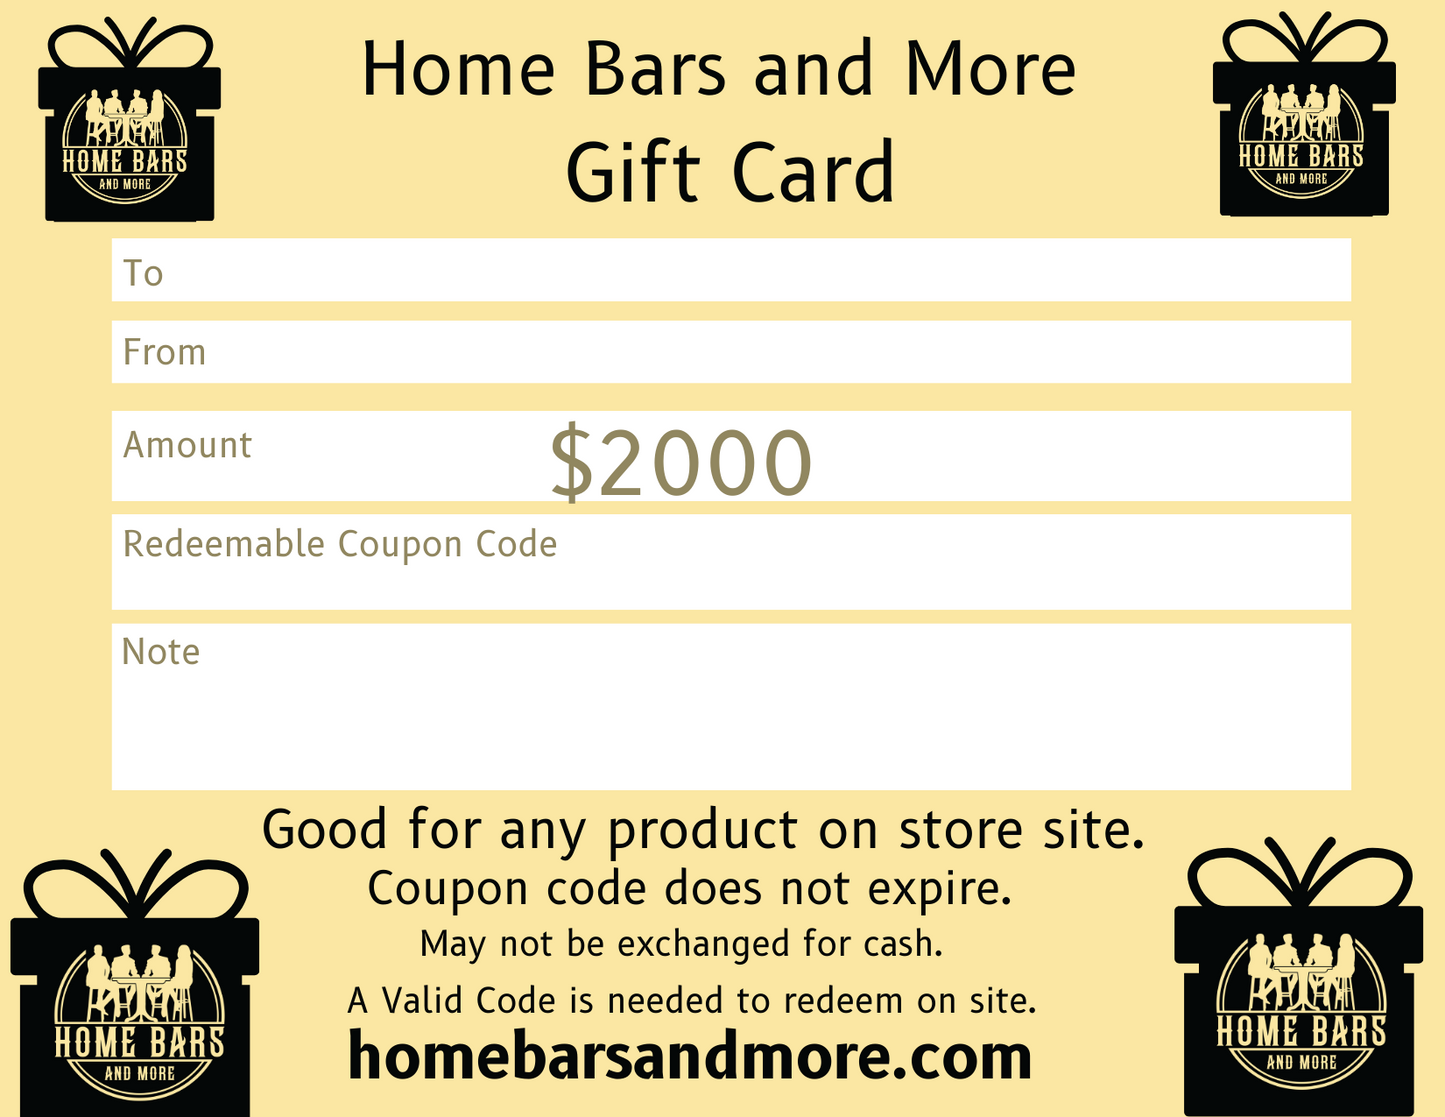 $2000 Gift Card to Home Bars and More